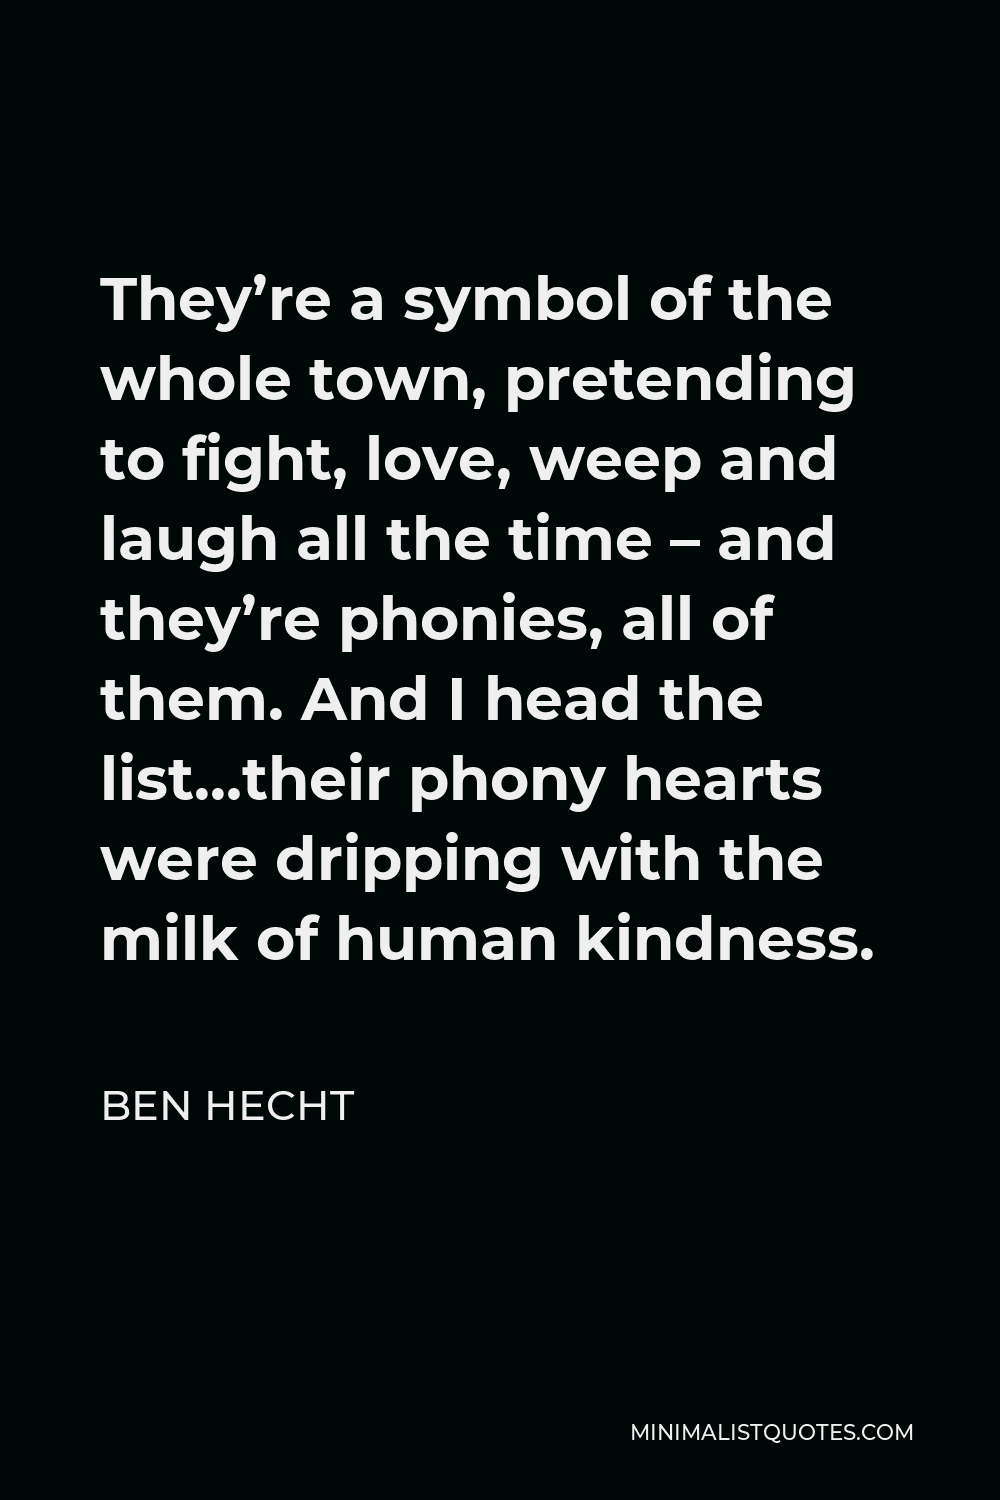 Ben Hecht Quote - They’re a symbol of the whole town, pretending to fight, love, weep and laugh all the time – and they’re phonies, all of them. And I head the list…their phony hearts were dripping with the milk of human kindness.